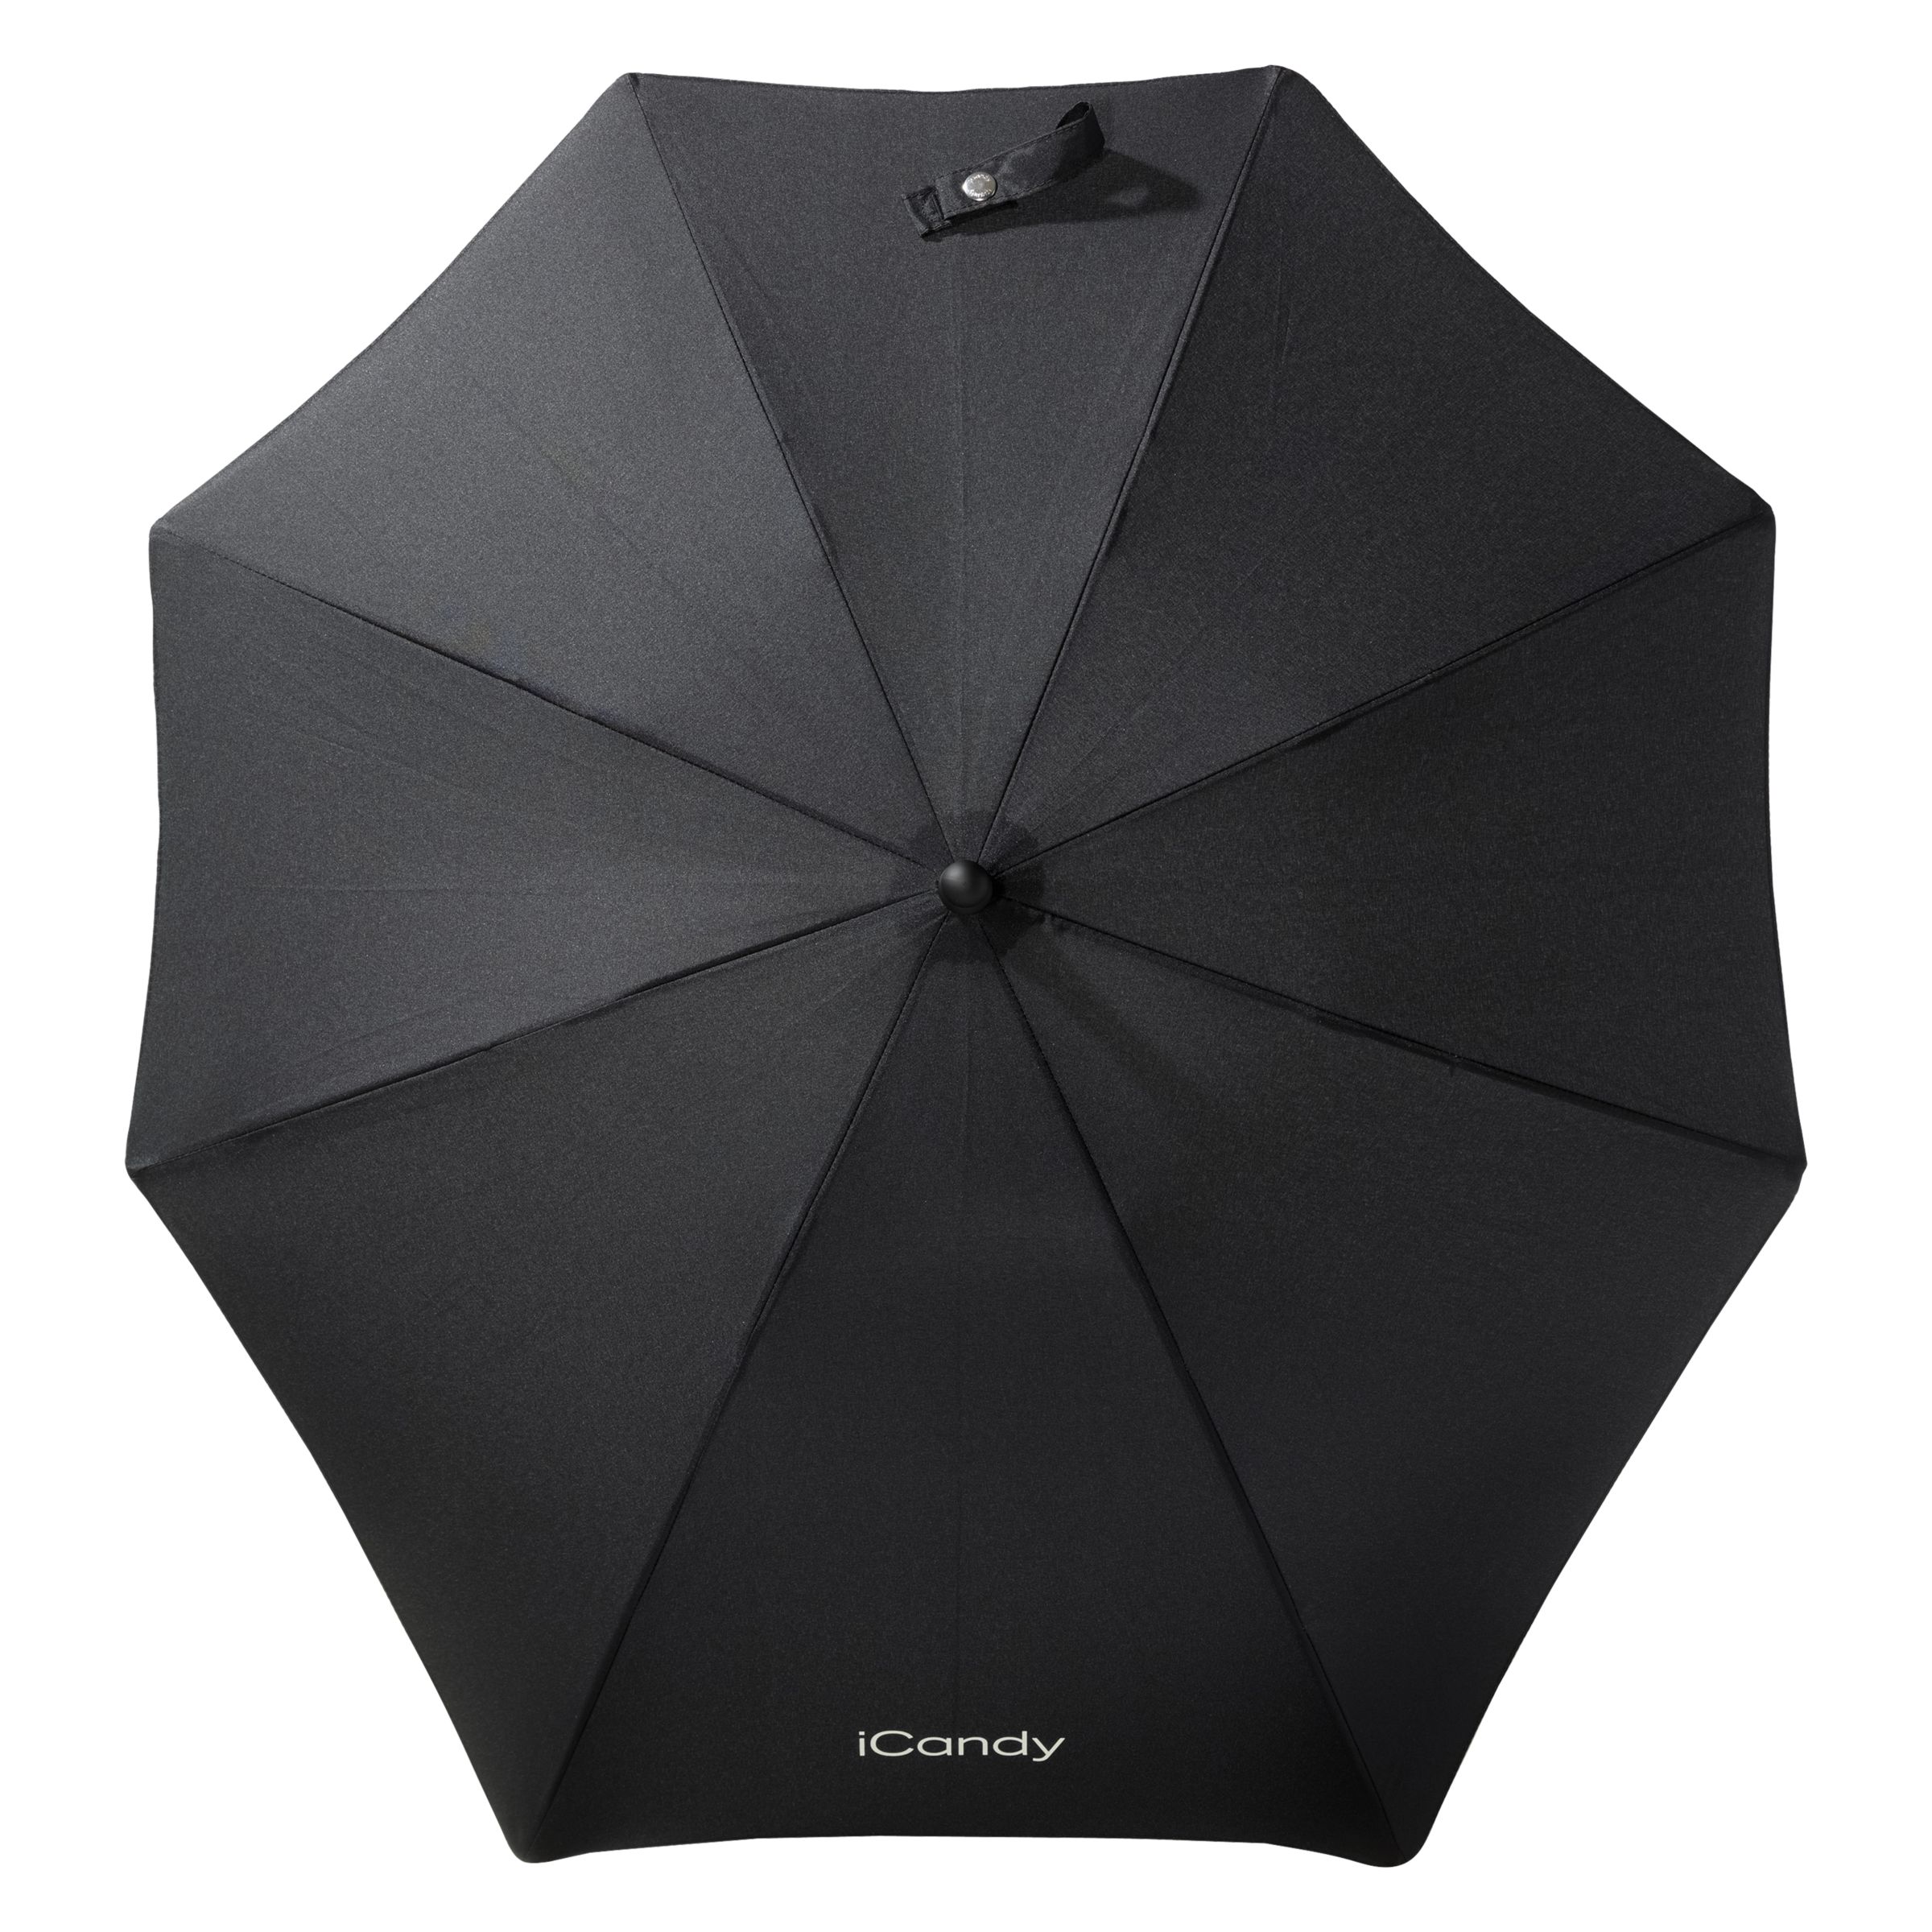 Image of iCandy Universal Pushchair Parasol